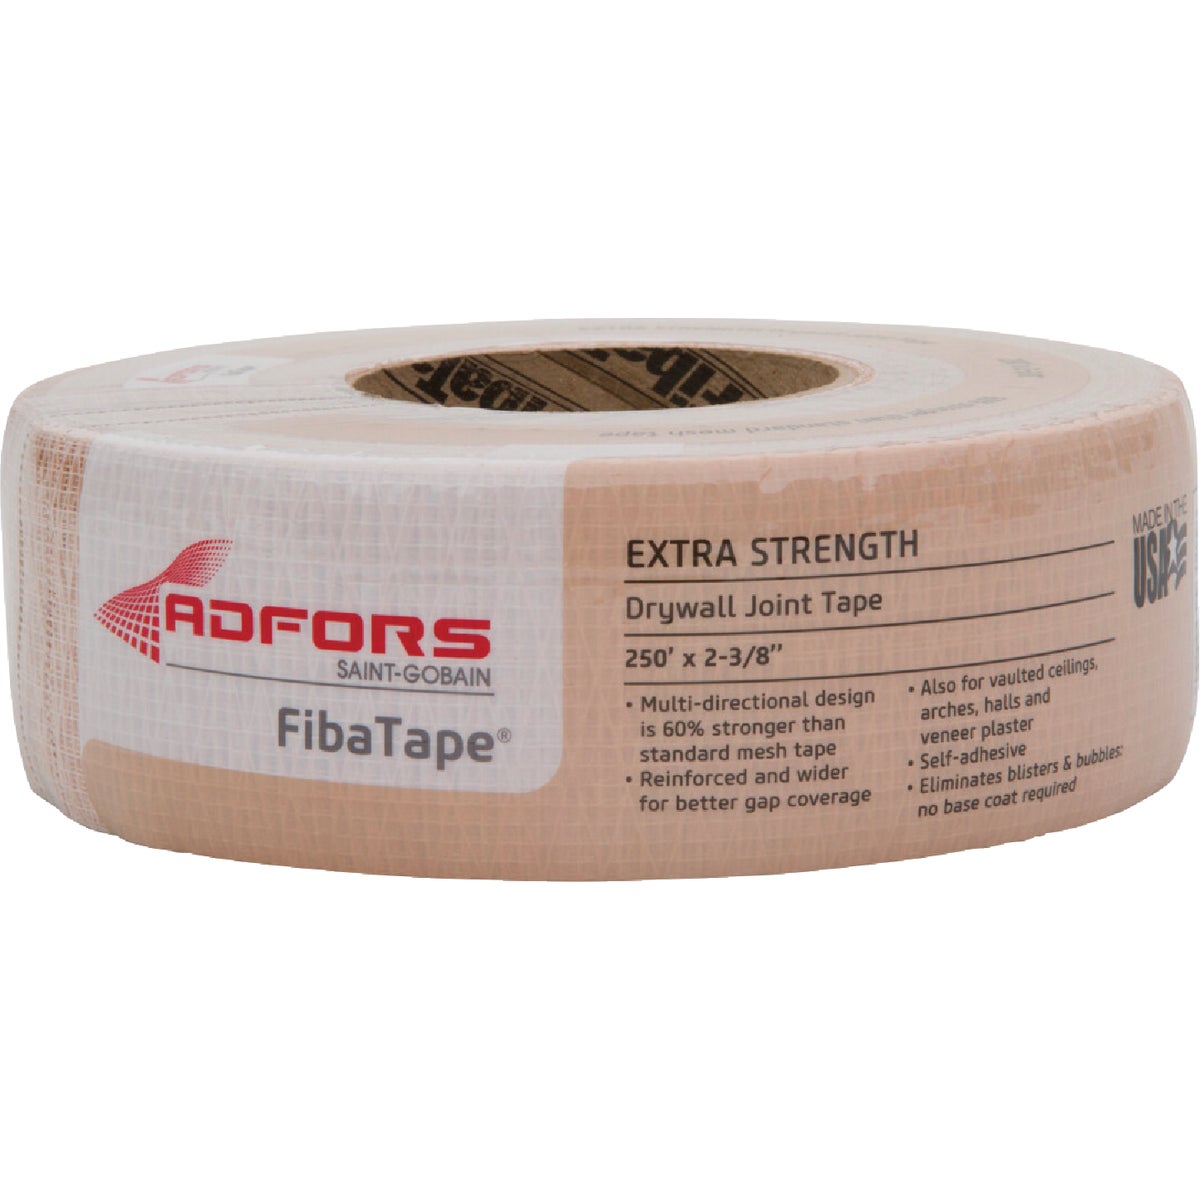 Item 260179, Extra strength FibaTape features a patented multi-directional pattern to 